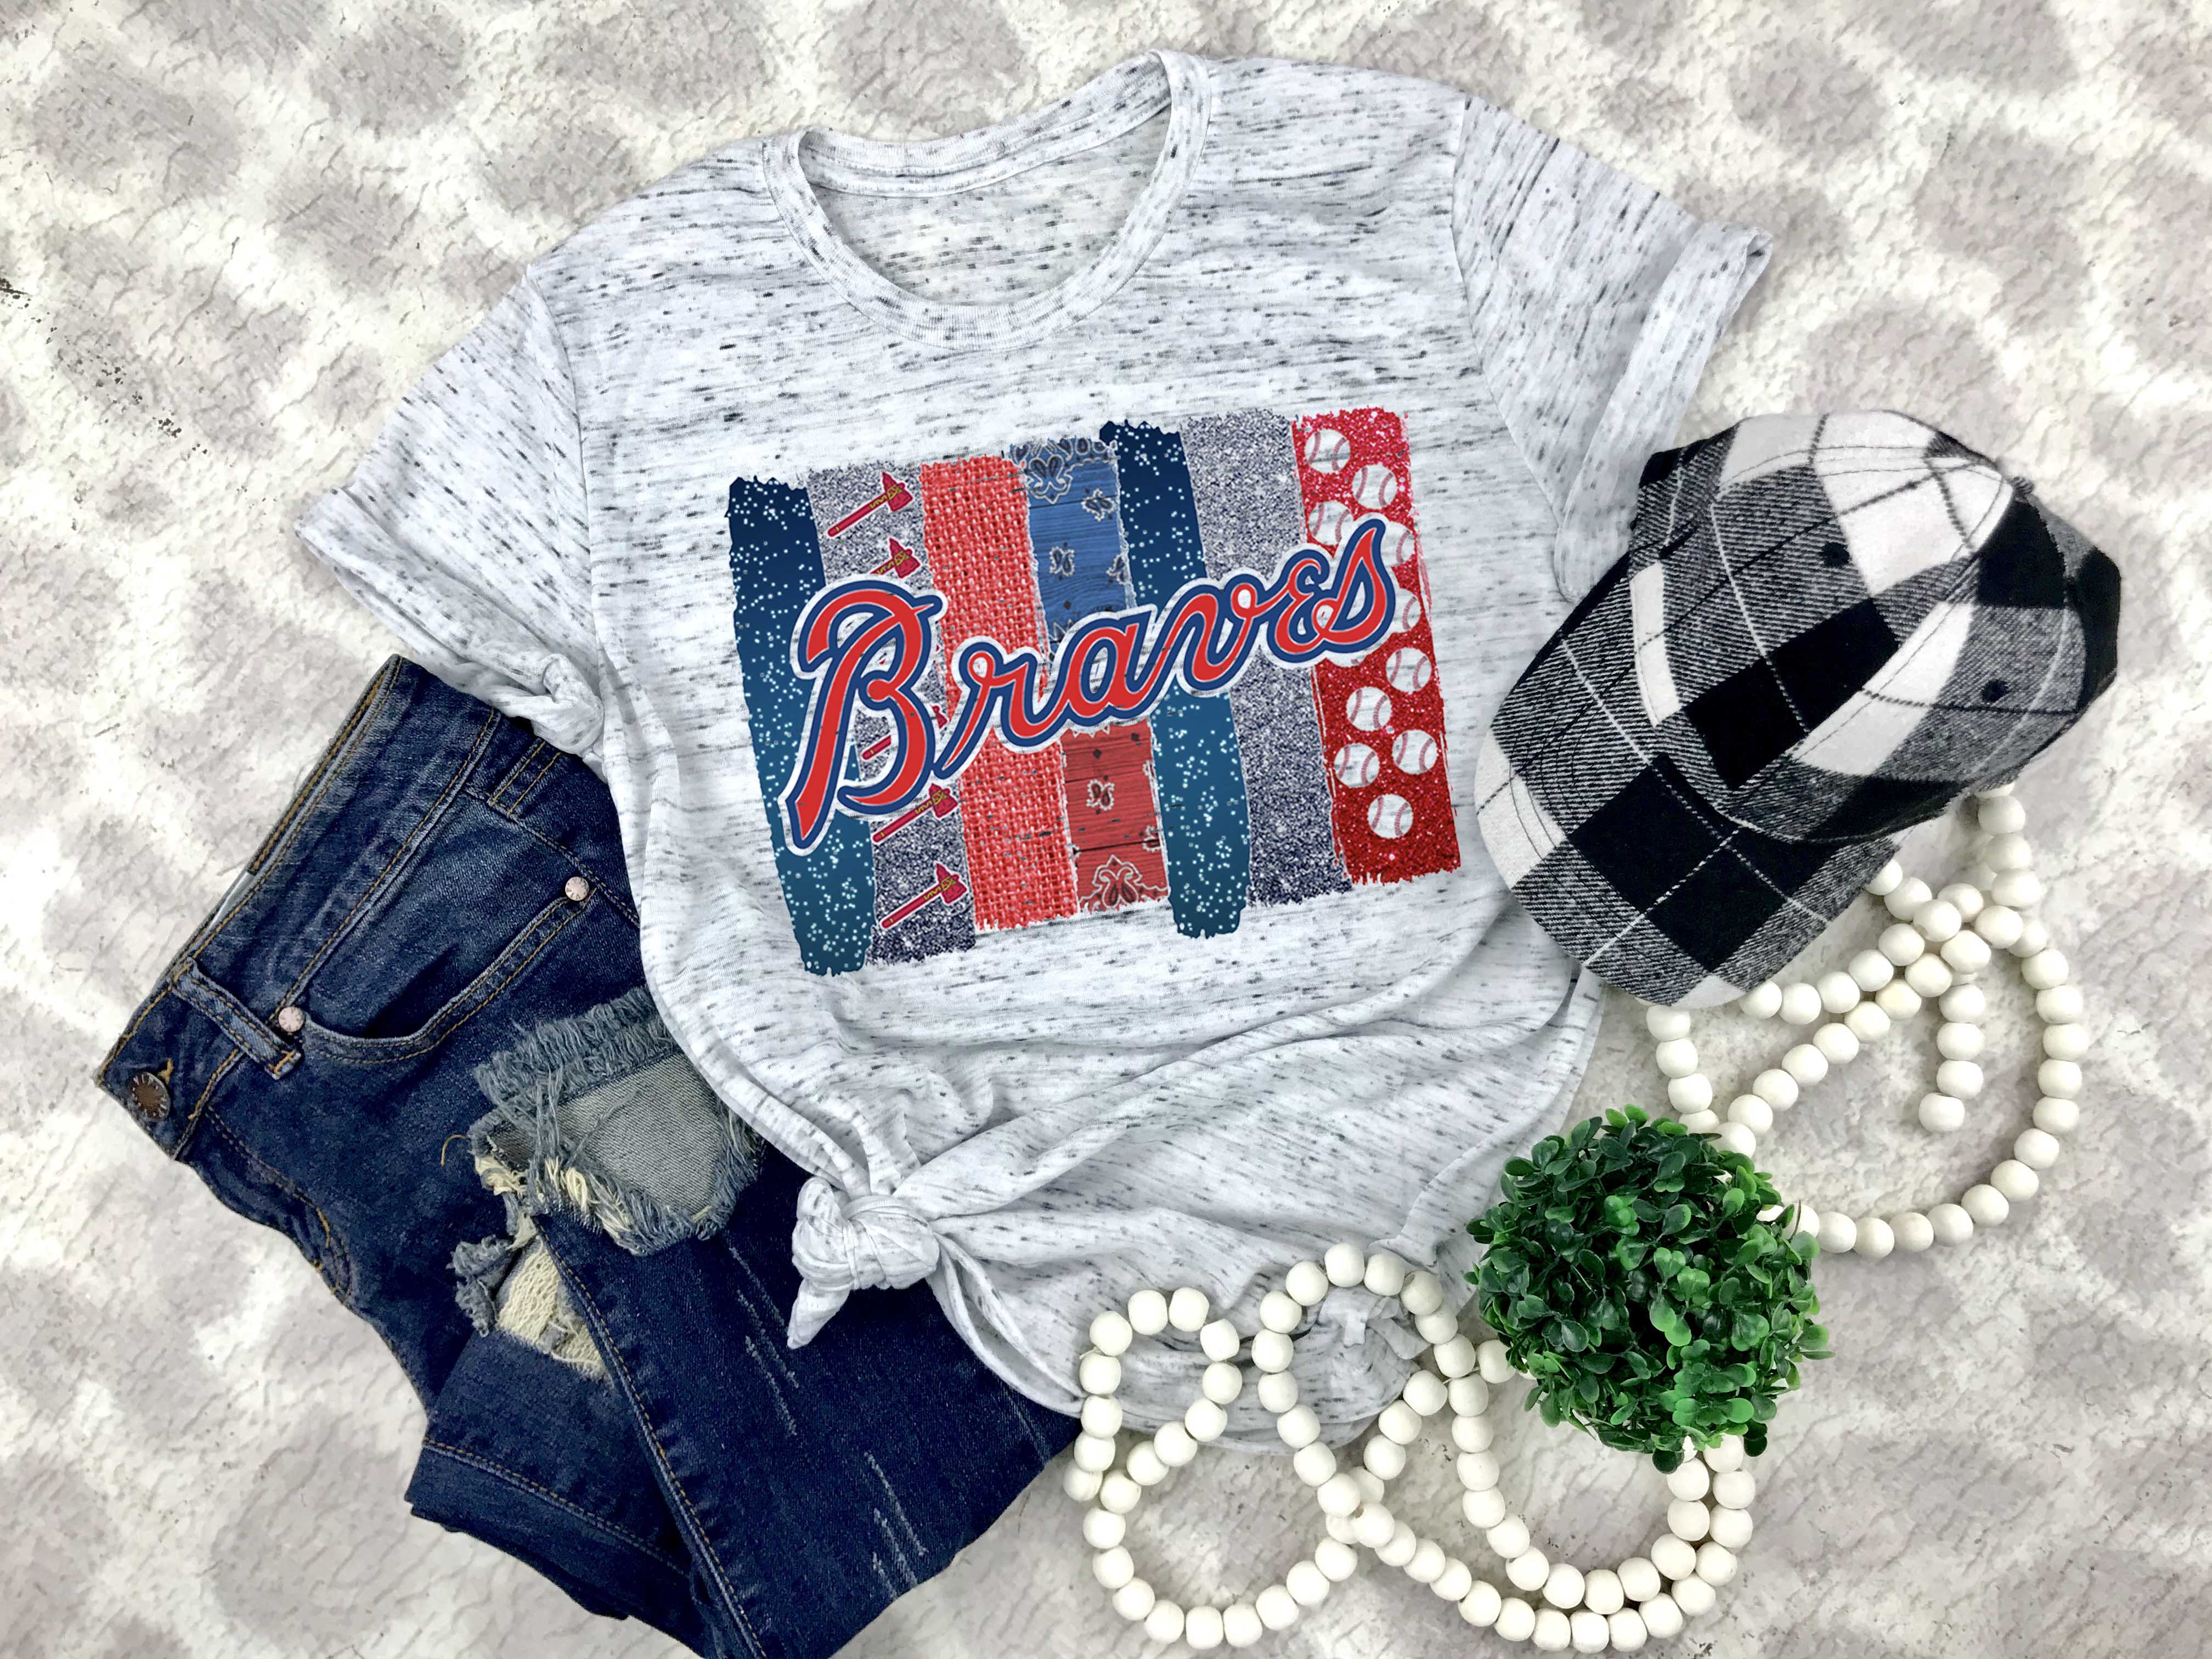 Atlanta Braves Accessories, Braves Gifts, Jewelry